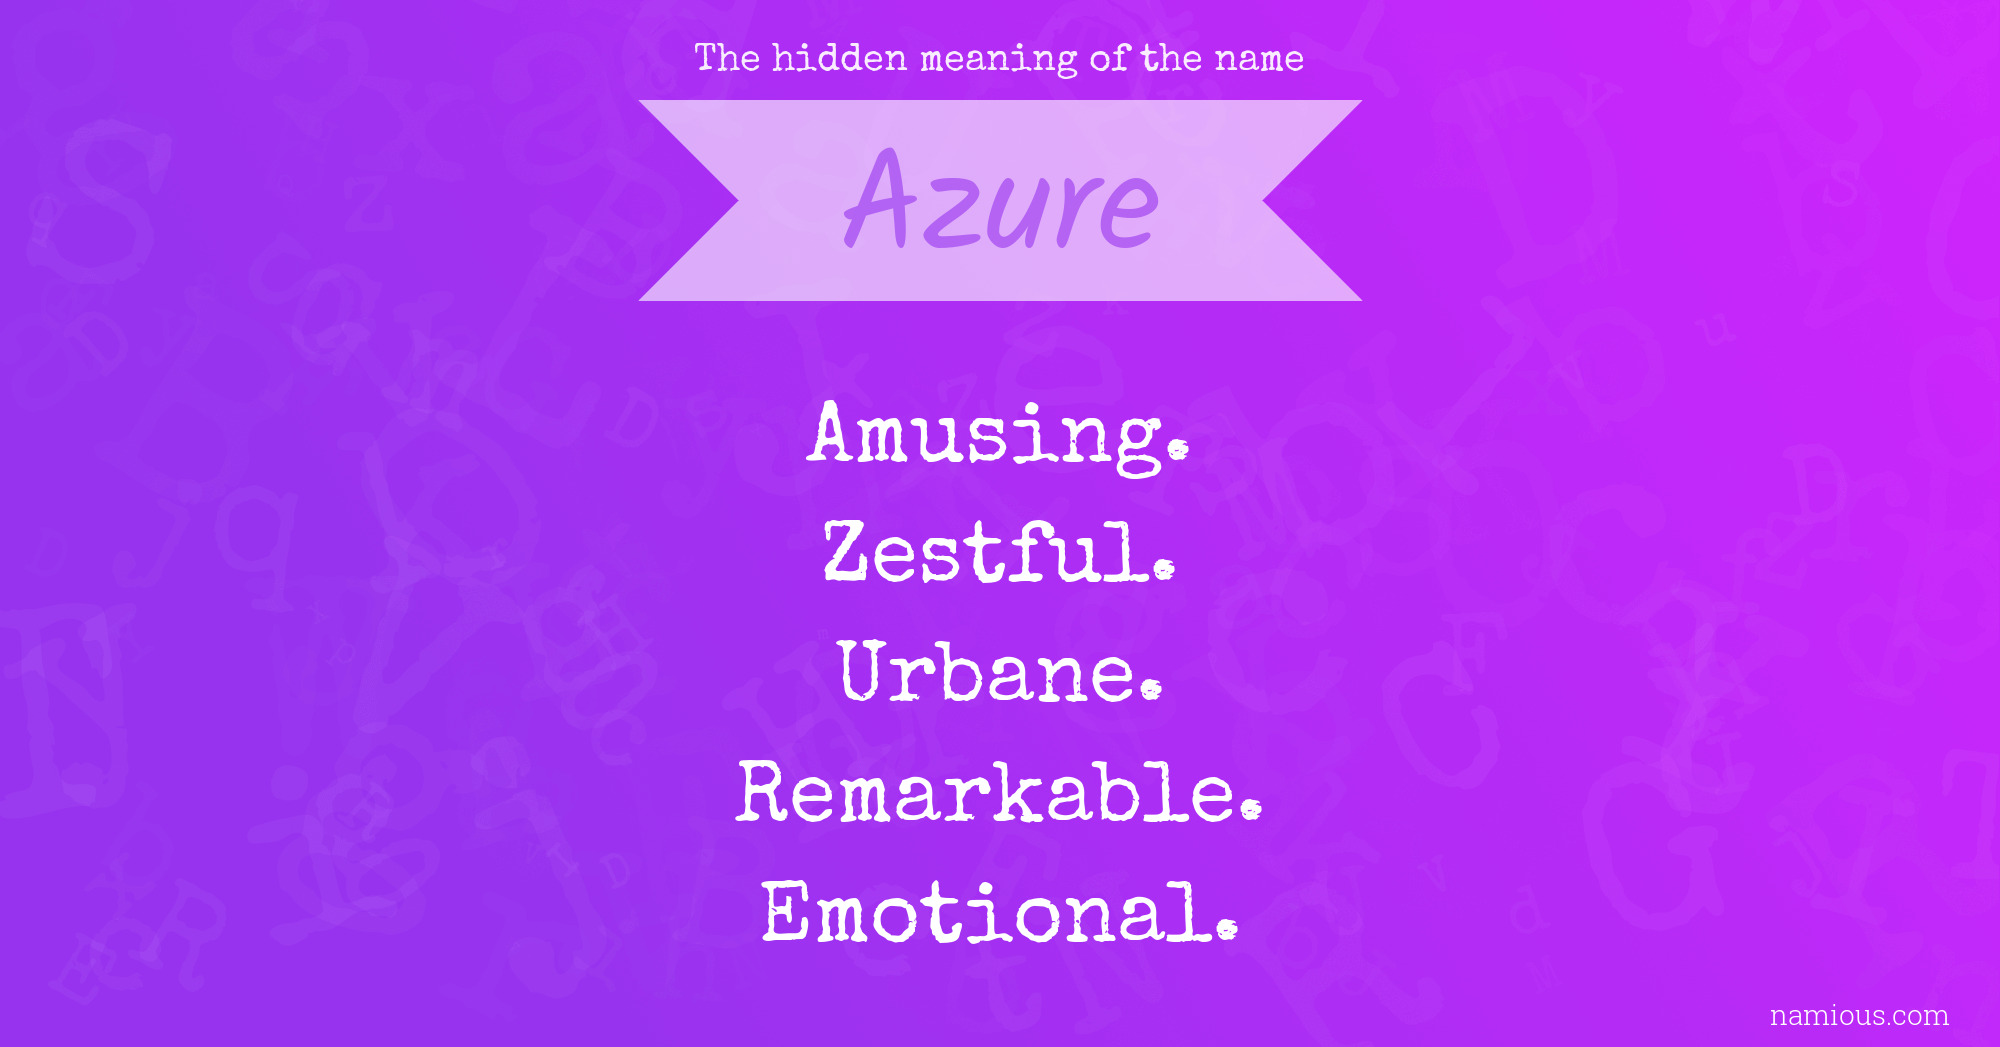 Azure meaning